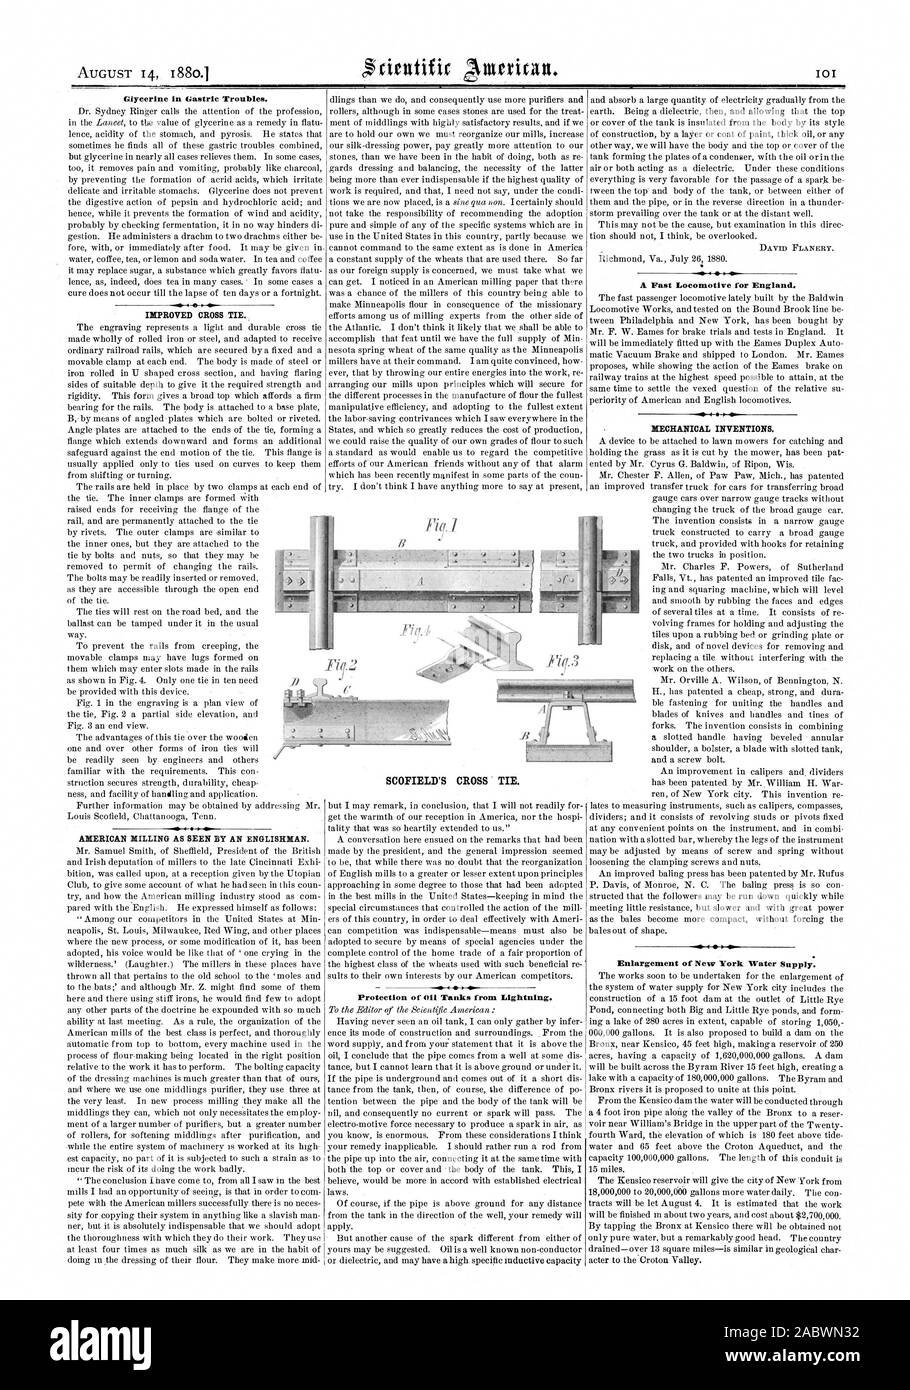 Glycerine in Gastric Troubles. IMPROVED CROSS TIE. AMERICAN MILLING AS SEEN EY AN ENGLISHMAN. Protection of Oil Tanks from Lightning. A Fast Locomotive for England. MECHANICAL INVENTIONS. Enlargement of New York Water Supply. SCOFIELD'S CROSS TIE., scientific american, 1880-08-14 Stock Photo